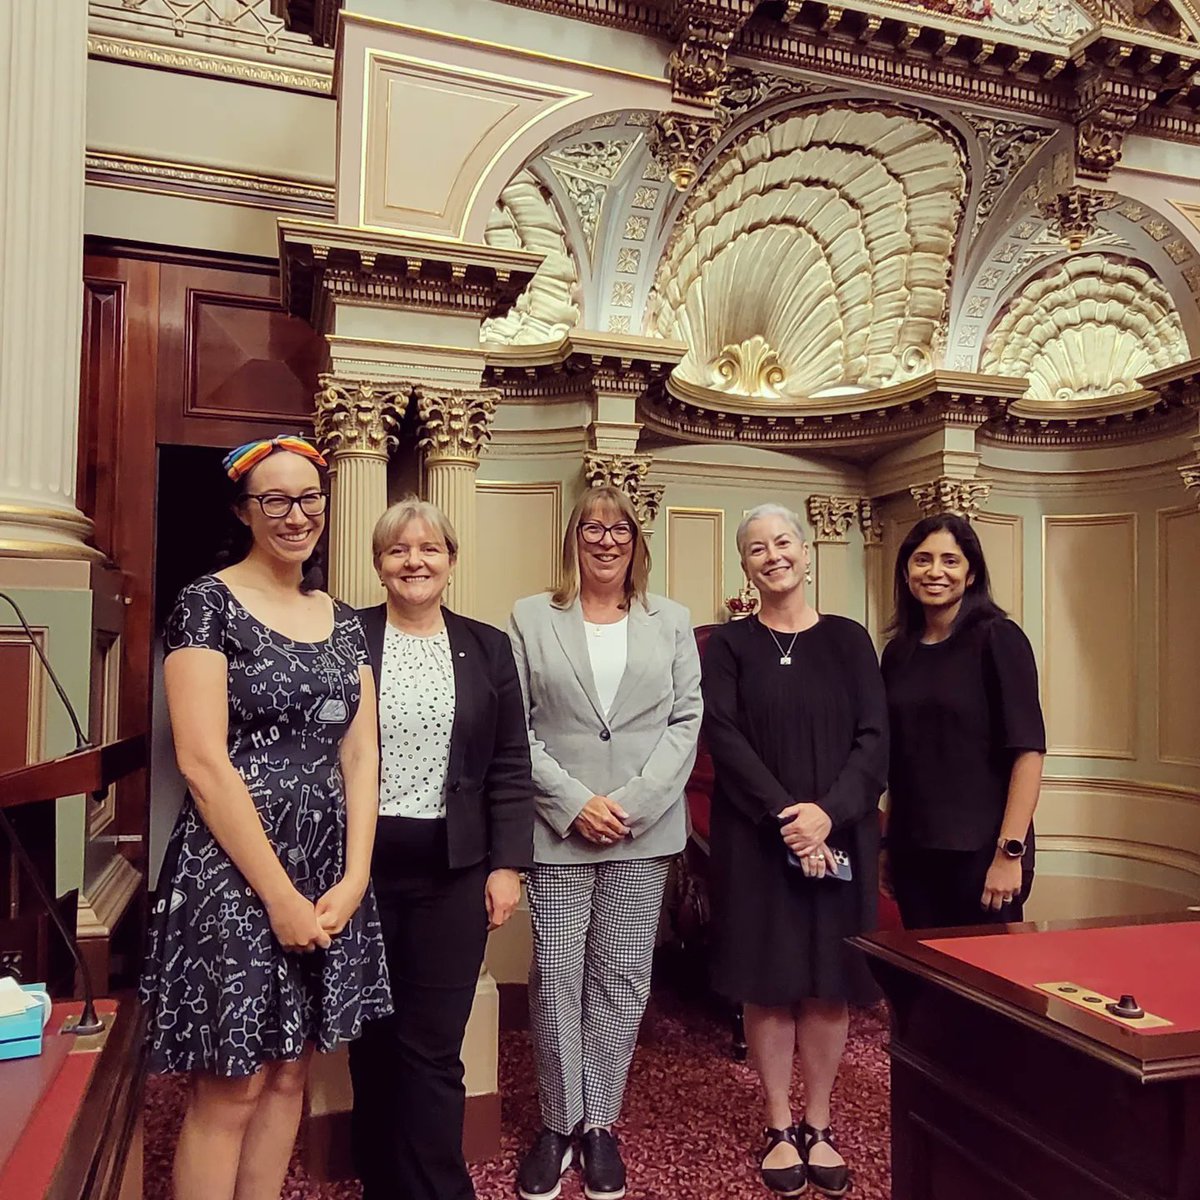 Happy #IDWGS! It's wonderful to be surrounded by incredible, inspiring women who do such amazing things. Thanks for the excellent discussion on how we can get more #WomeninSTEM & keep them there. #WomenInScience
@MVEG001 @CES_Vic @sophieadamsmelb @madhu_bhaskaran